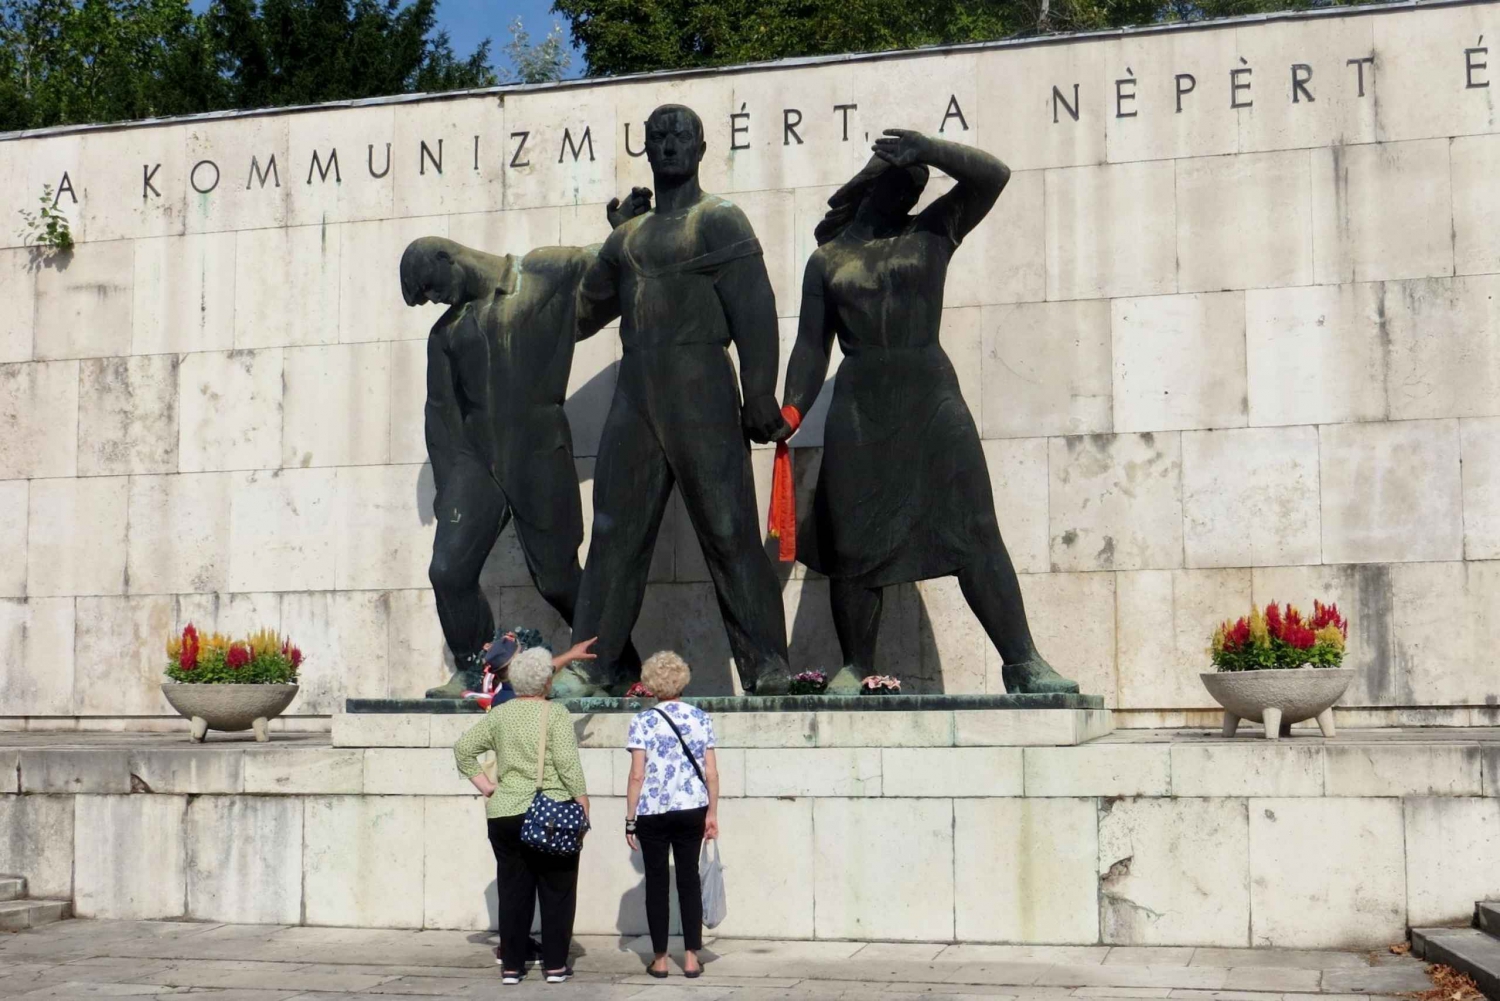 Life Under Communism with House of Terror or Statue Park